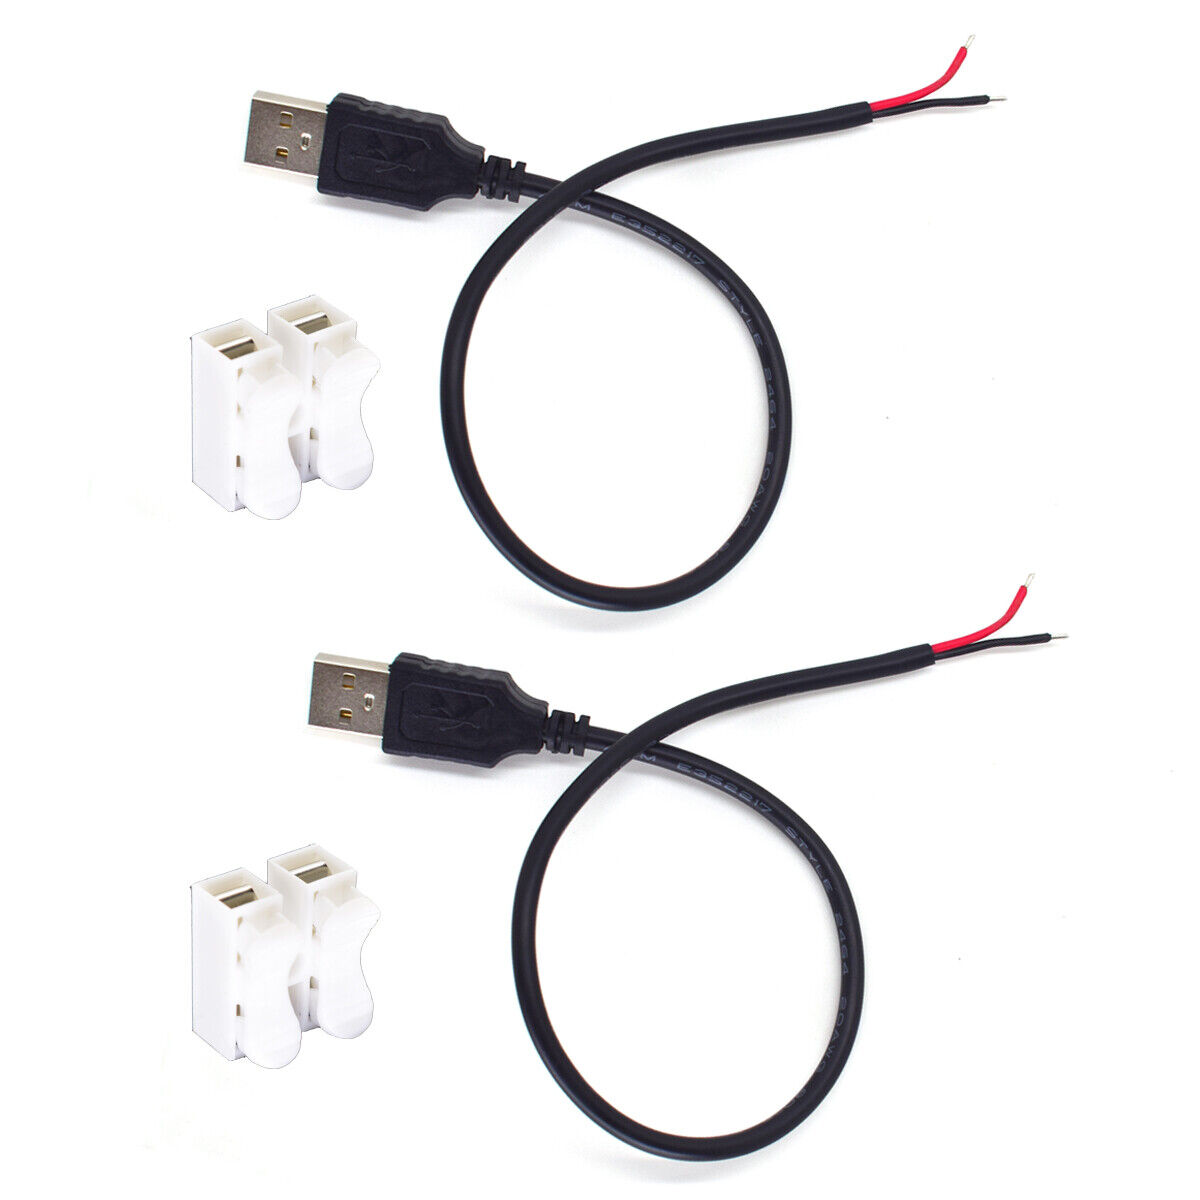 50pcs 0.3M/1FT USB Male to Bare Wire Cable 20AWG 5A USB2.0 2pin Pigtail Cable